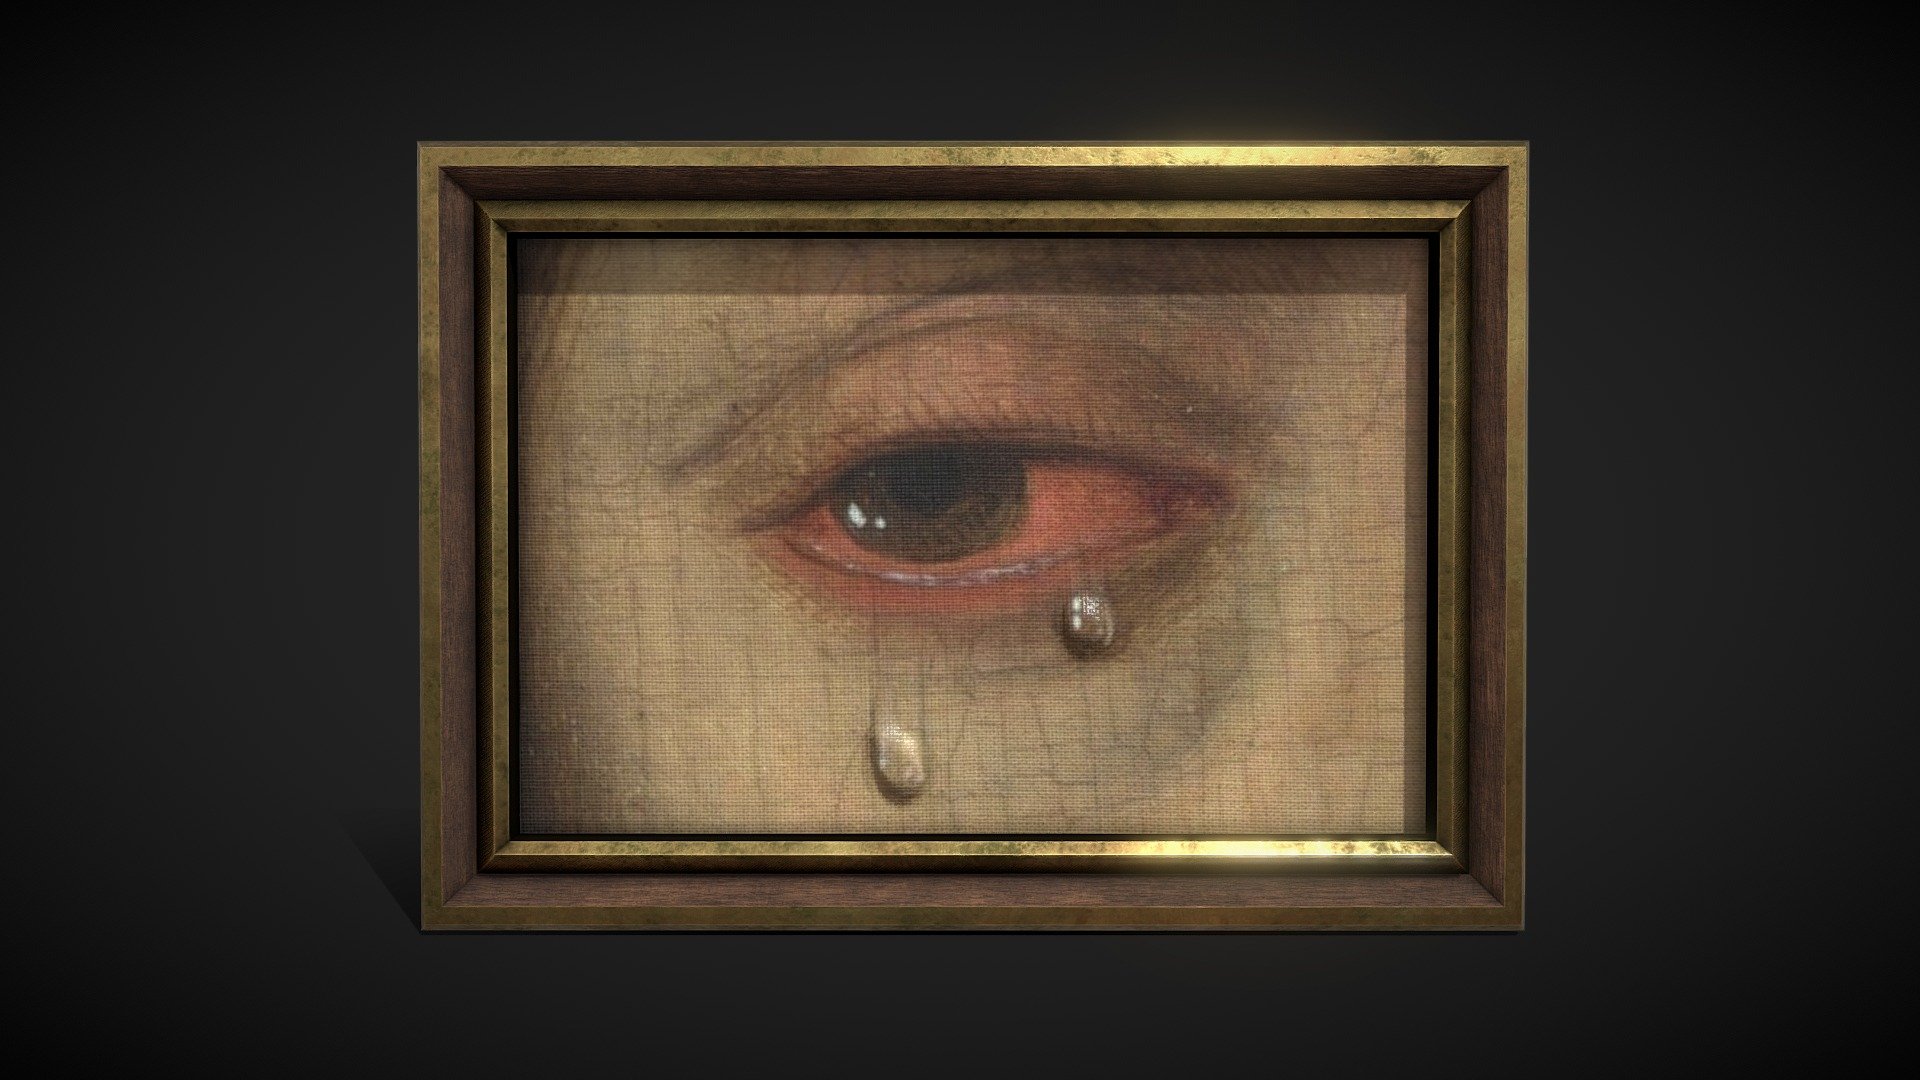 Cry Eye Framed Painting - low poly

Triangles: 76
Vertices: 40

4096x4096 PNG texture - Cry Eye Framed Painting - low poly - Buy Royalty Free 3D model by Karolina Renkiewicz (@KarolinaRenkiewicz) 3d model